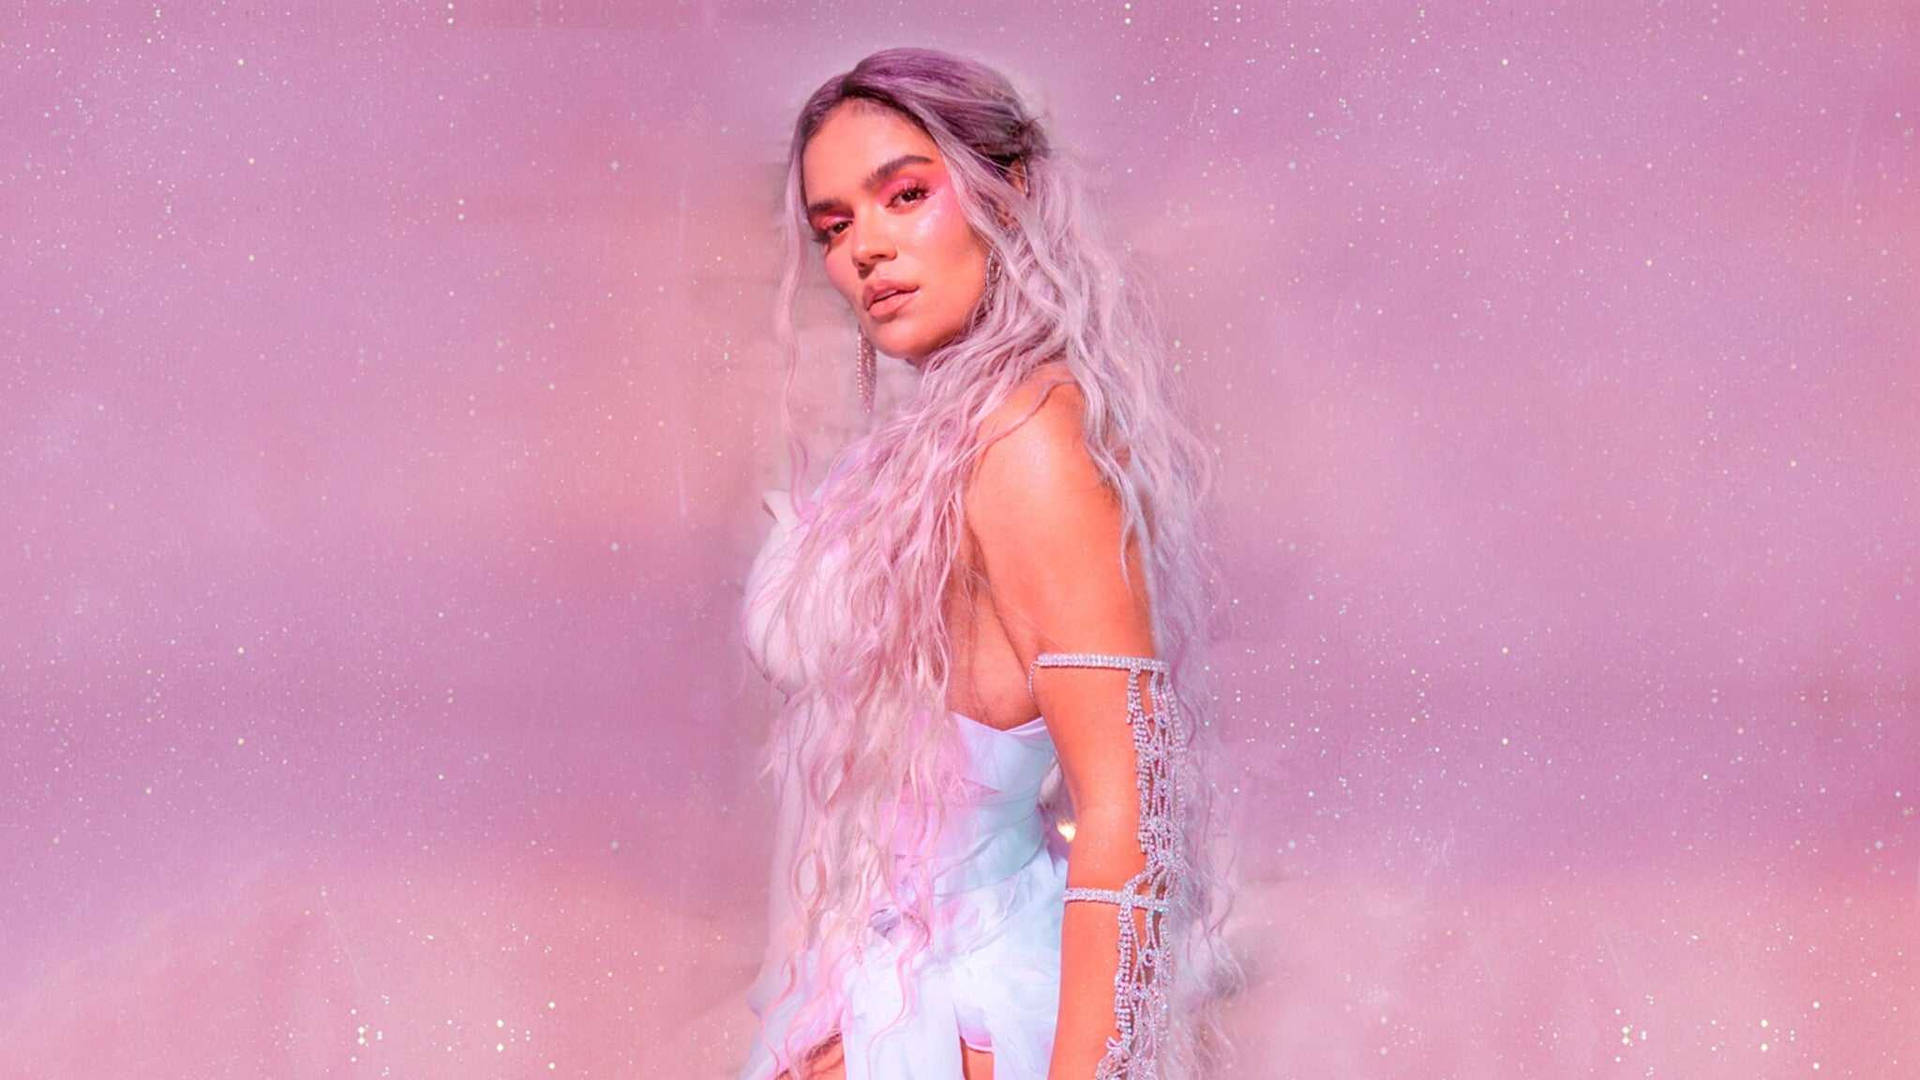 Karol G Promises New Music With Steamy Pics In Pink Bra and Miniskirt